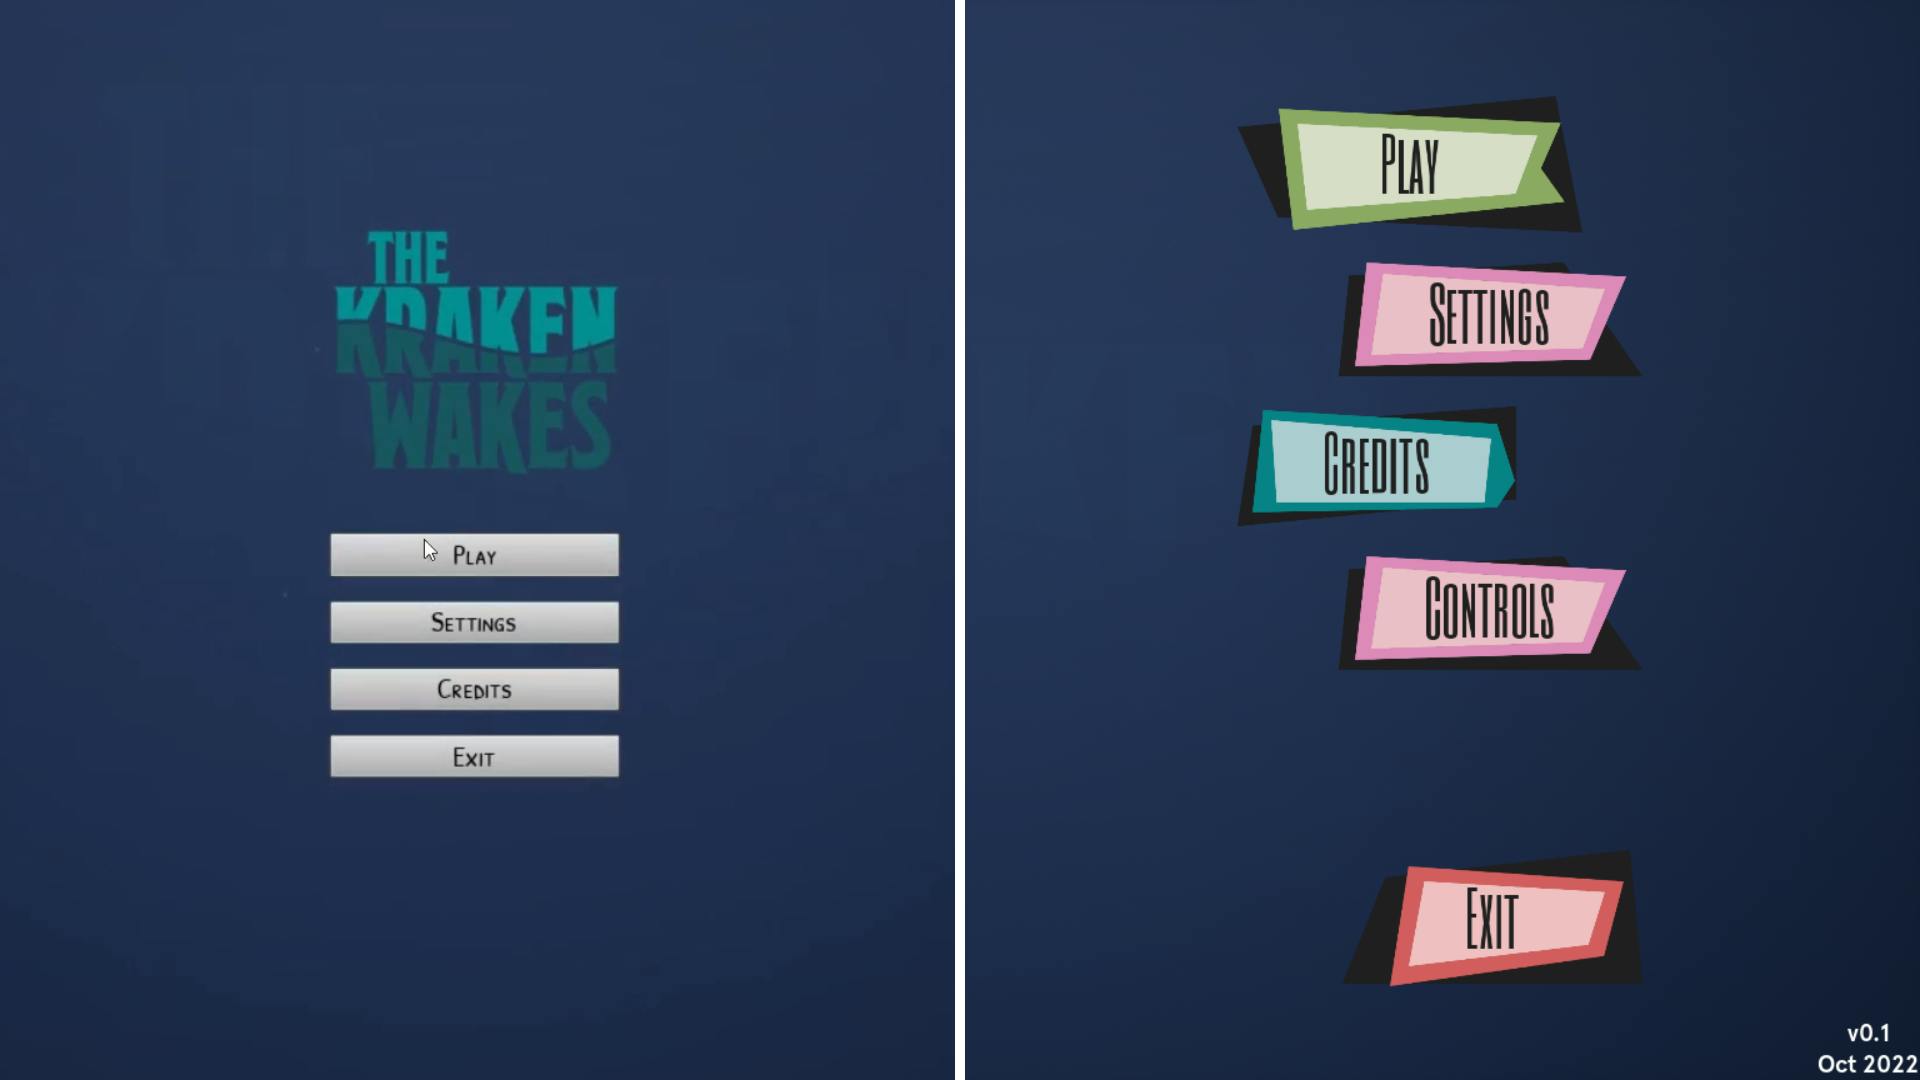 Before and after screenshots of the main menu. On the left, 'The Kraken Wakes' turquoise logo, and a column of small, rectangular, grey buttons on a dark blue background. On the right, a column of irregular shaped, geometric buttons in green, pink, blue and red, on a dark blue background. 